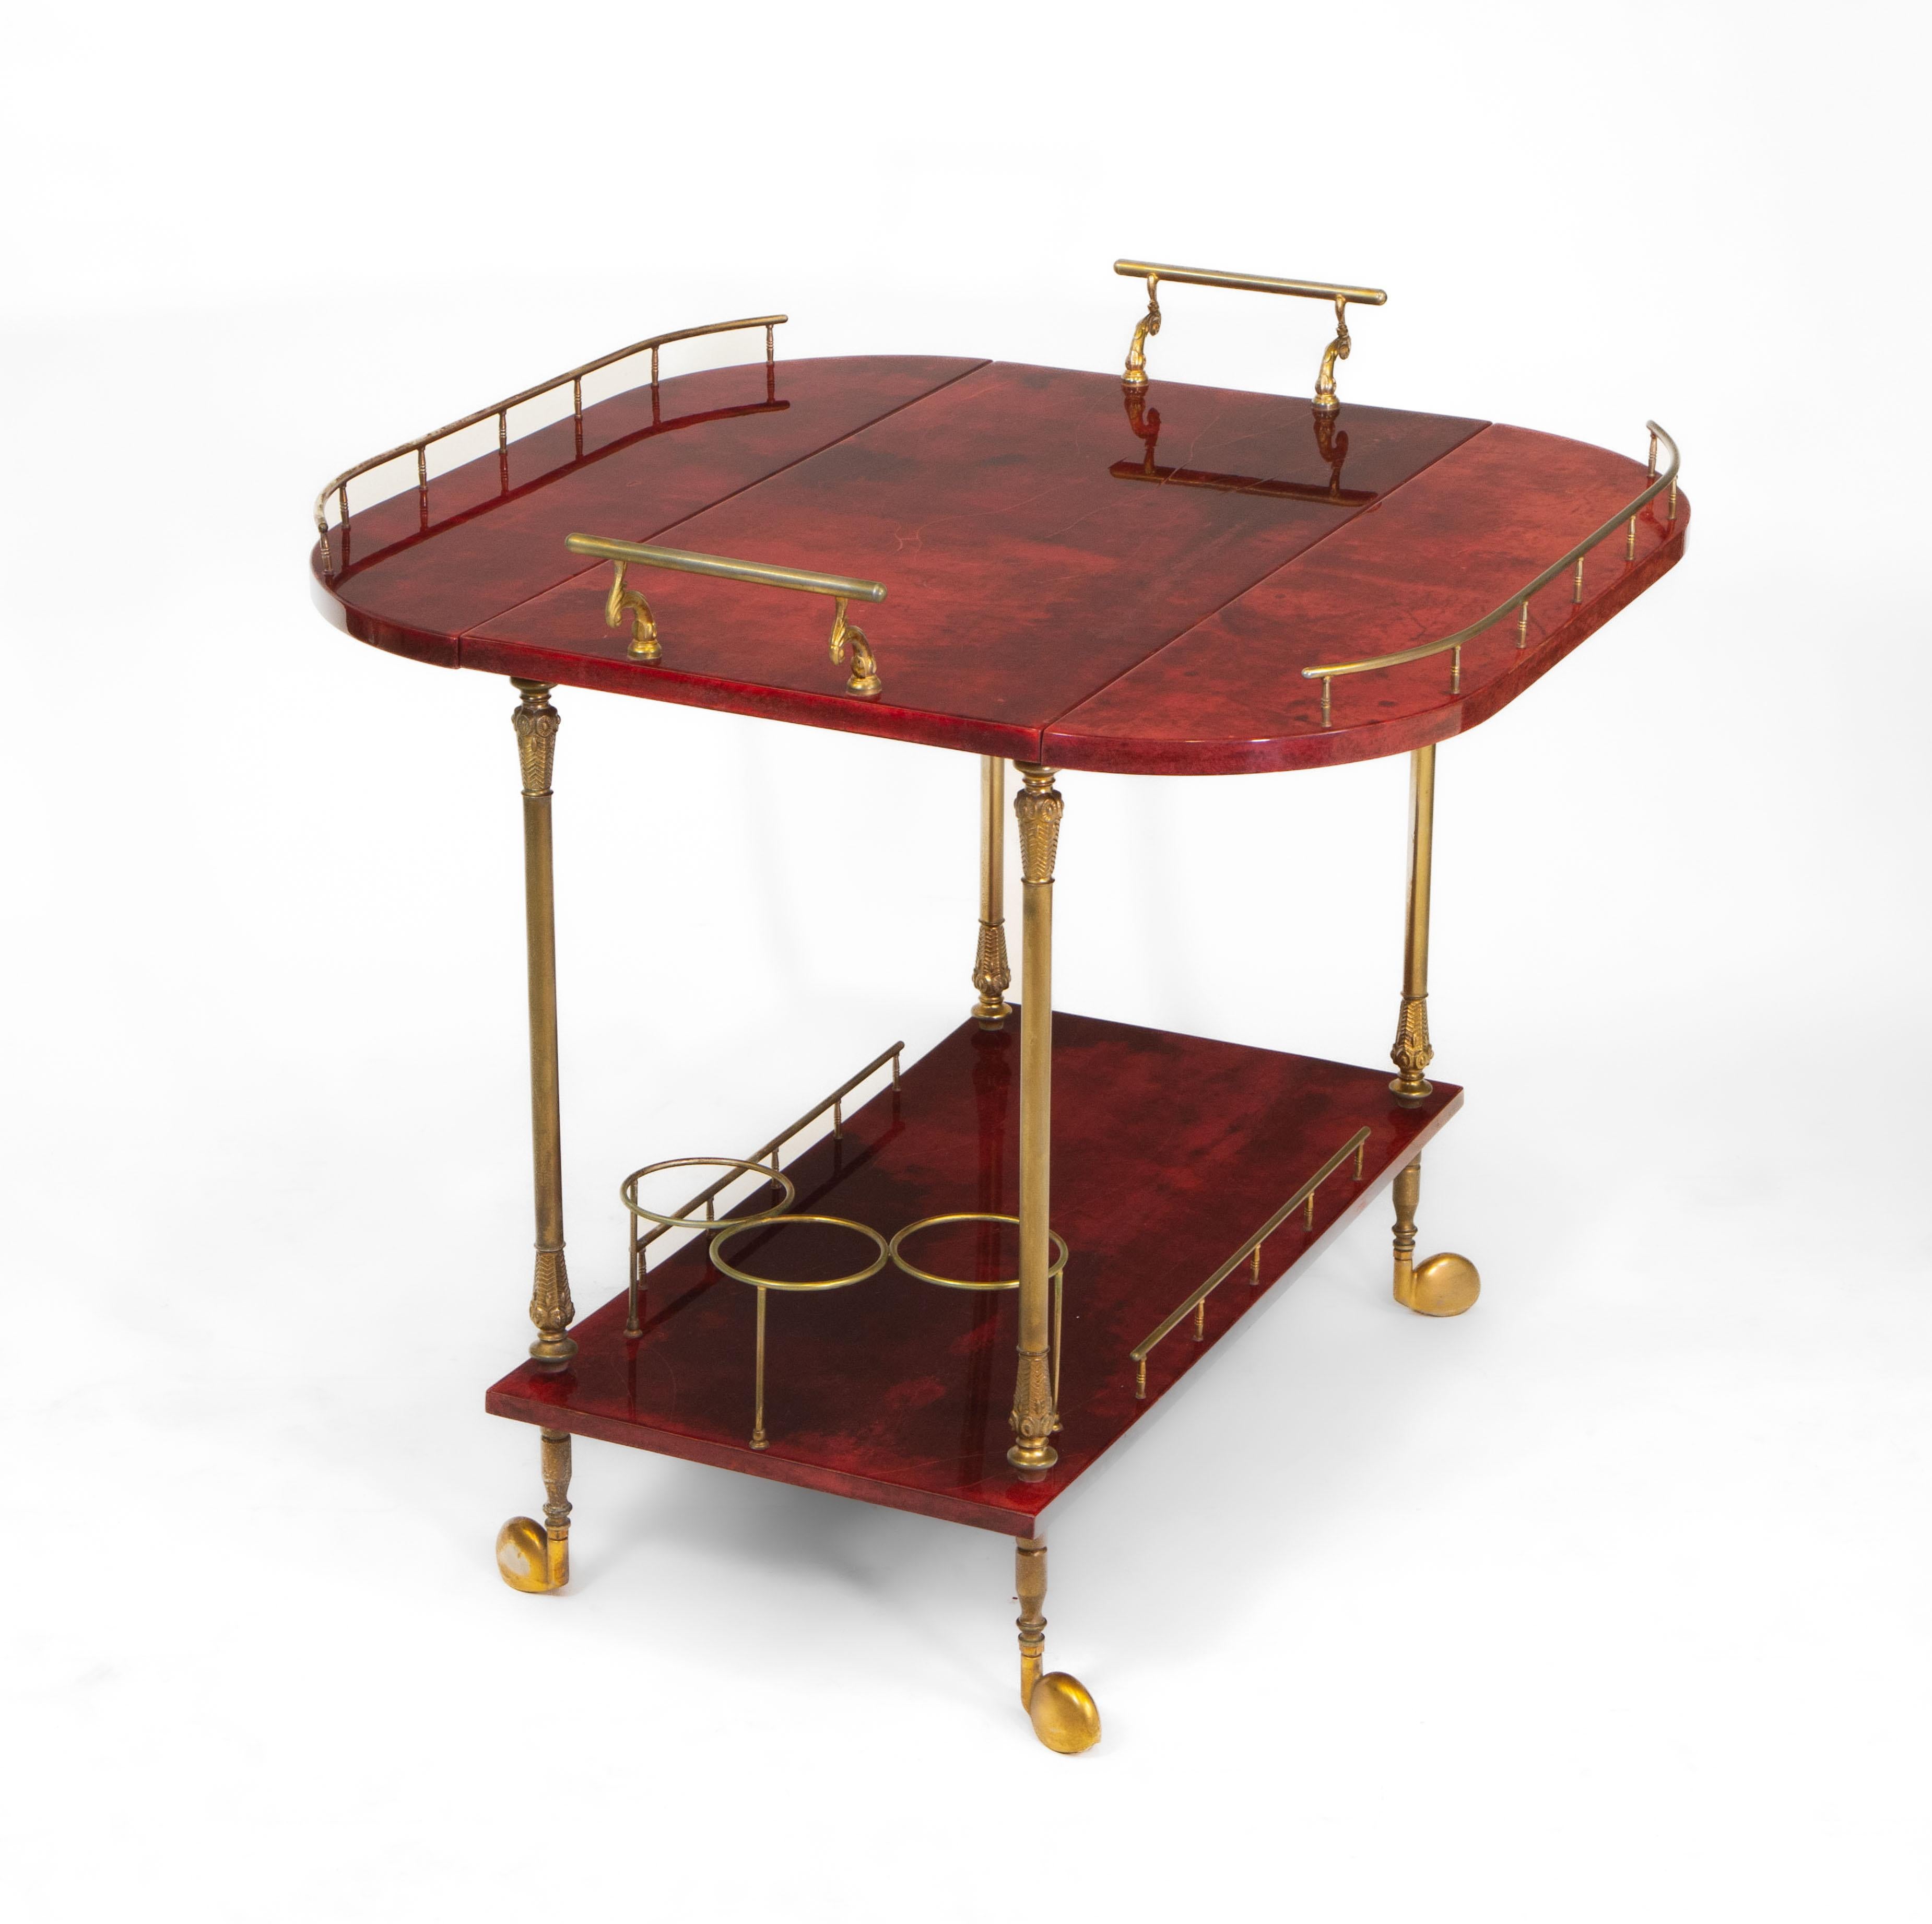 A fabulous mid-century Italian two-tier rich red coloured parchment vellum and gilt metal drinks trolley, designed by Aldo Tura (1909–1963). Labelled: Tura Milano. Circa 1950's.

Aldo Tura began manufacturing his signature furniture in the 1930s.